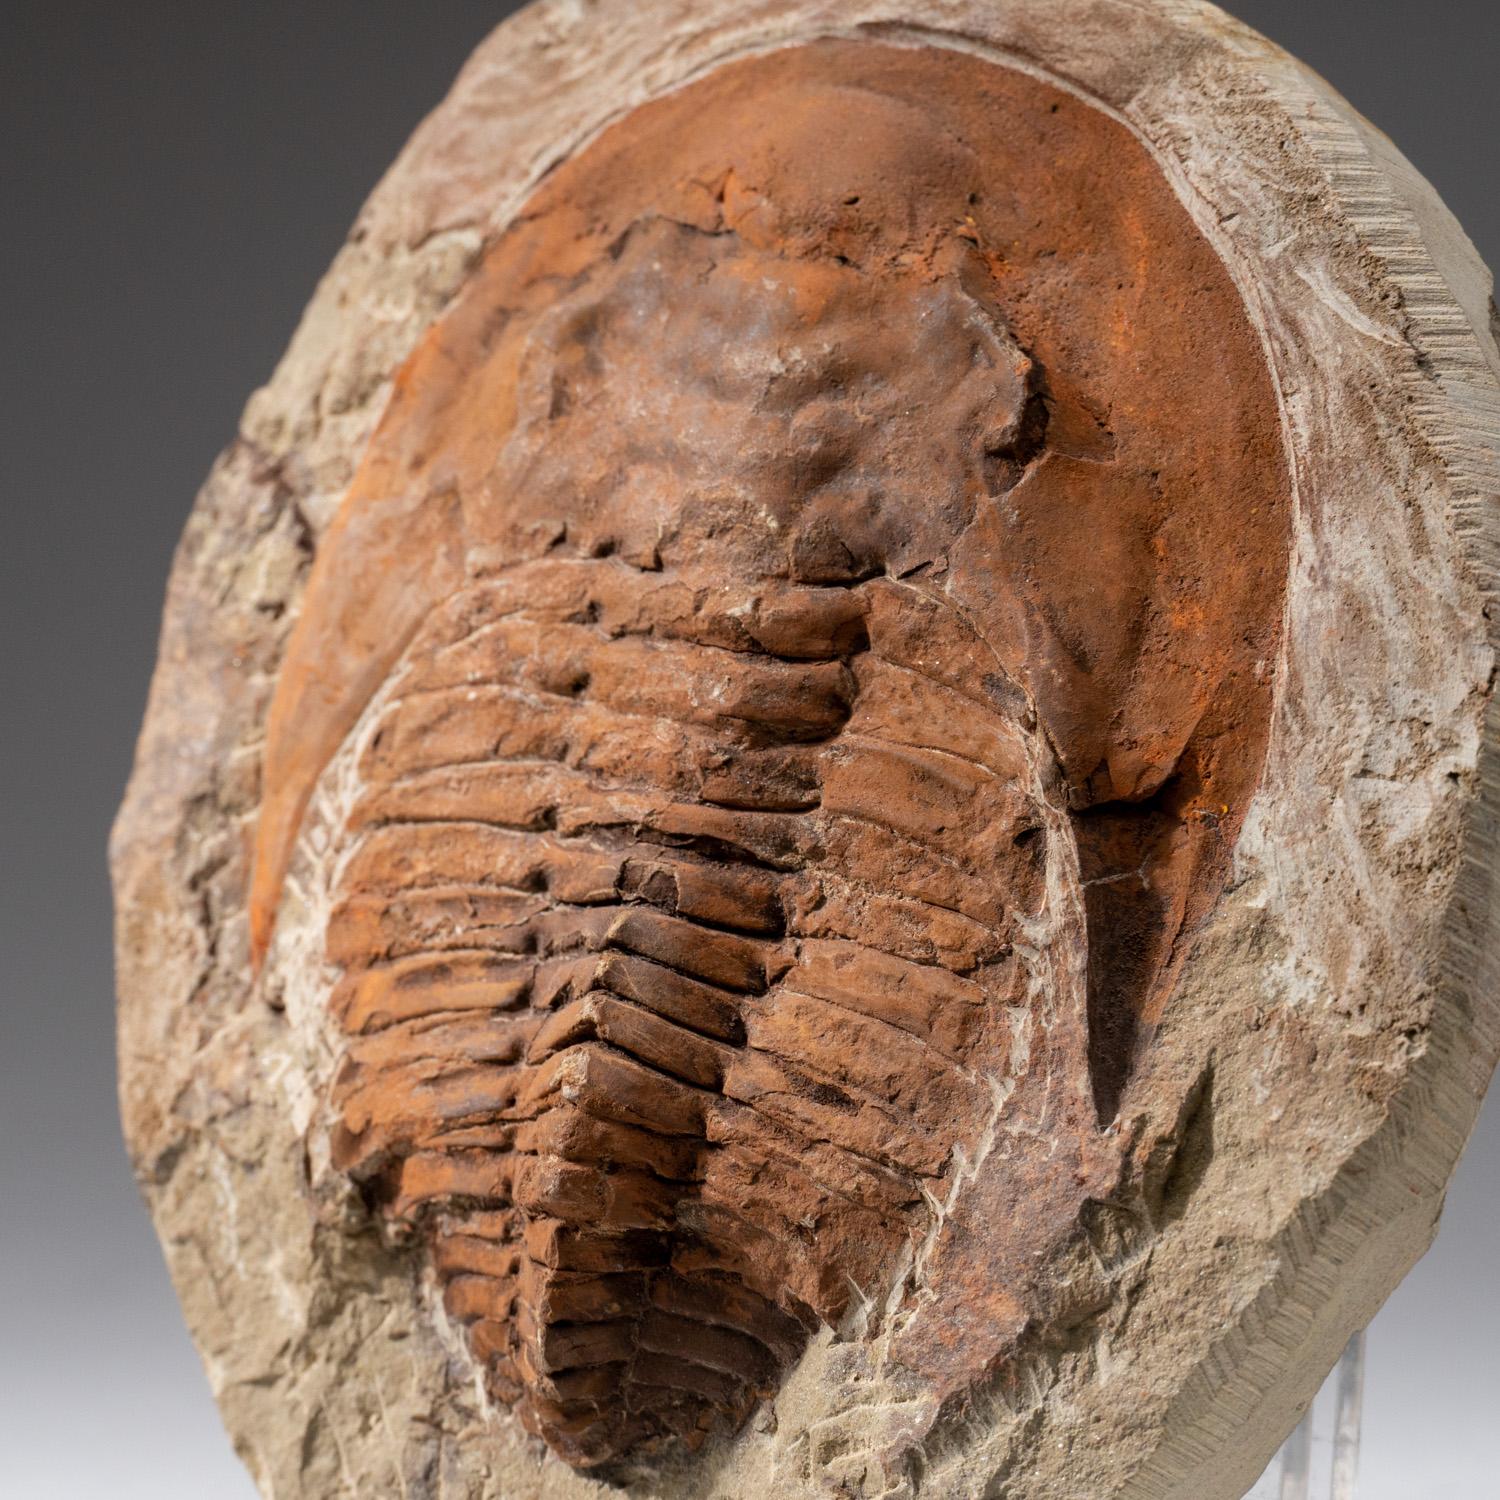 Ptychopariida is a large, heterogeneous order of trilobite containing some of the most primitive species known. The earliest species occurred in the second half of the Lower Cambrian period. This order of trilobites was one of the earliest life